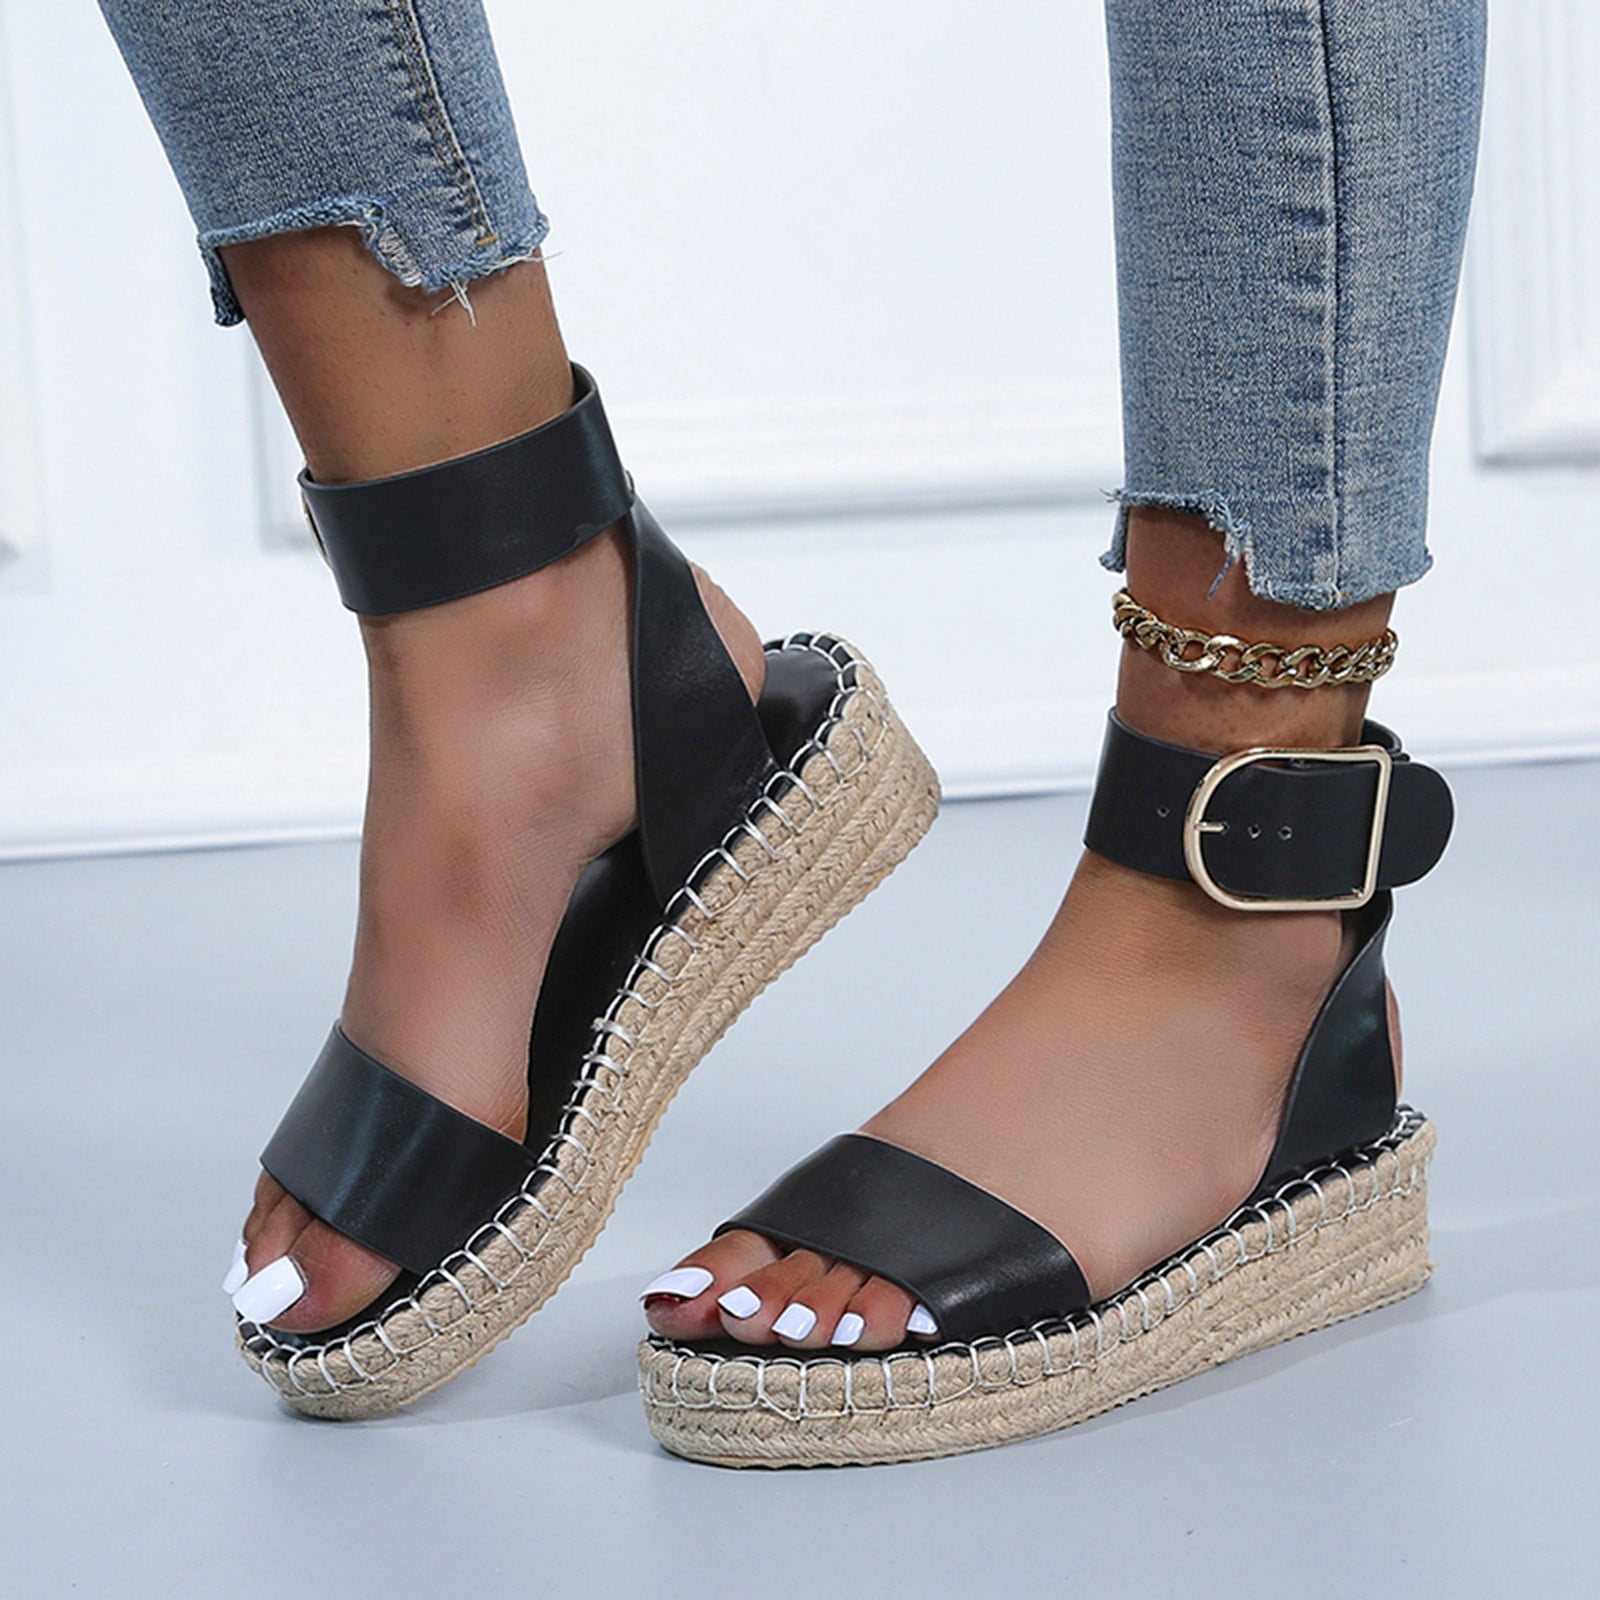 Women Summer Sandals,Fashion Roman String Bead Thick Wedges Shoes 2019 Hot 